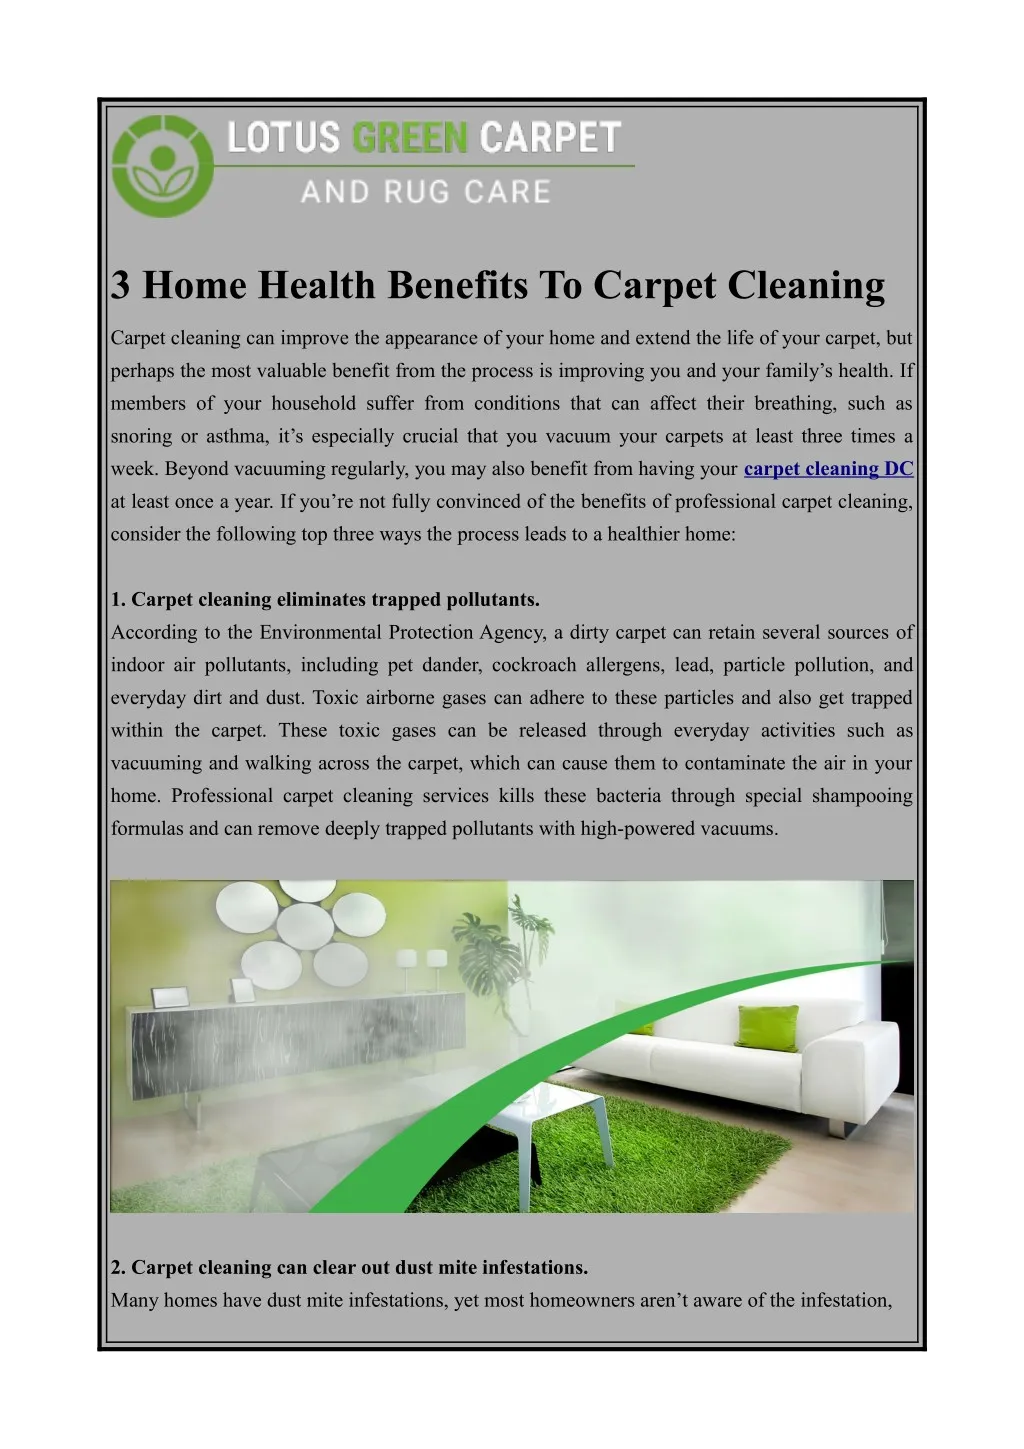 3 home health benefits to carpet cleaning